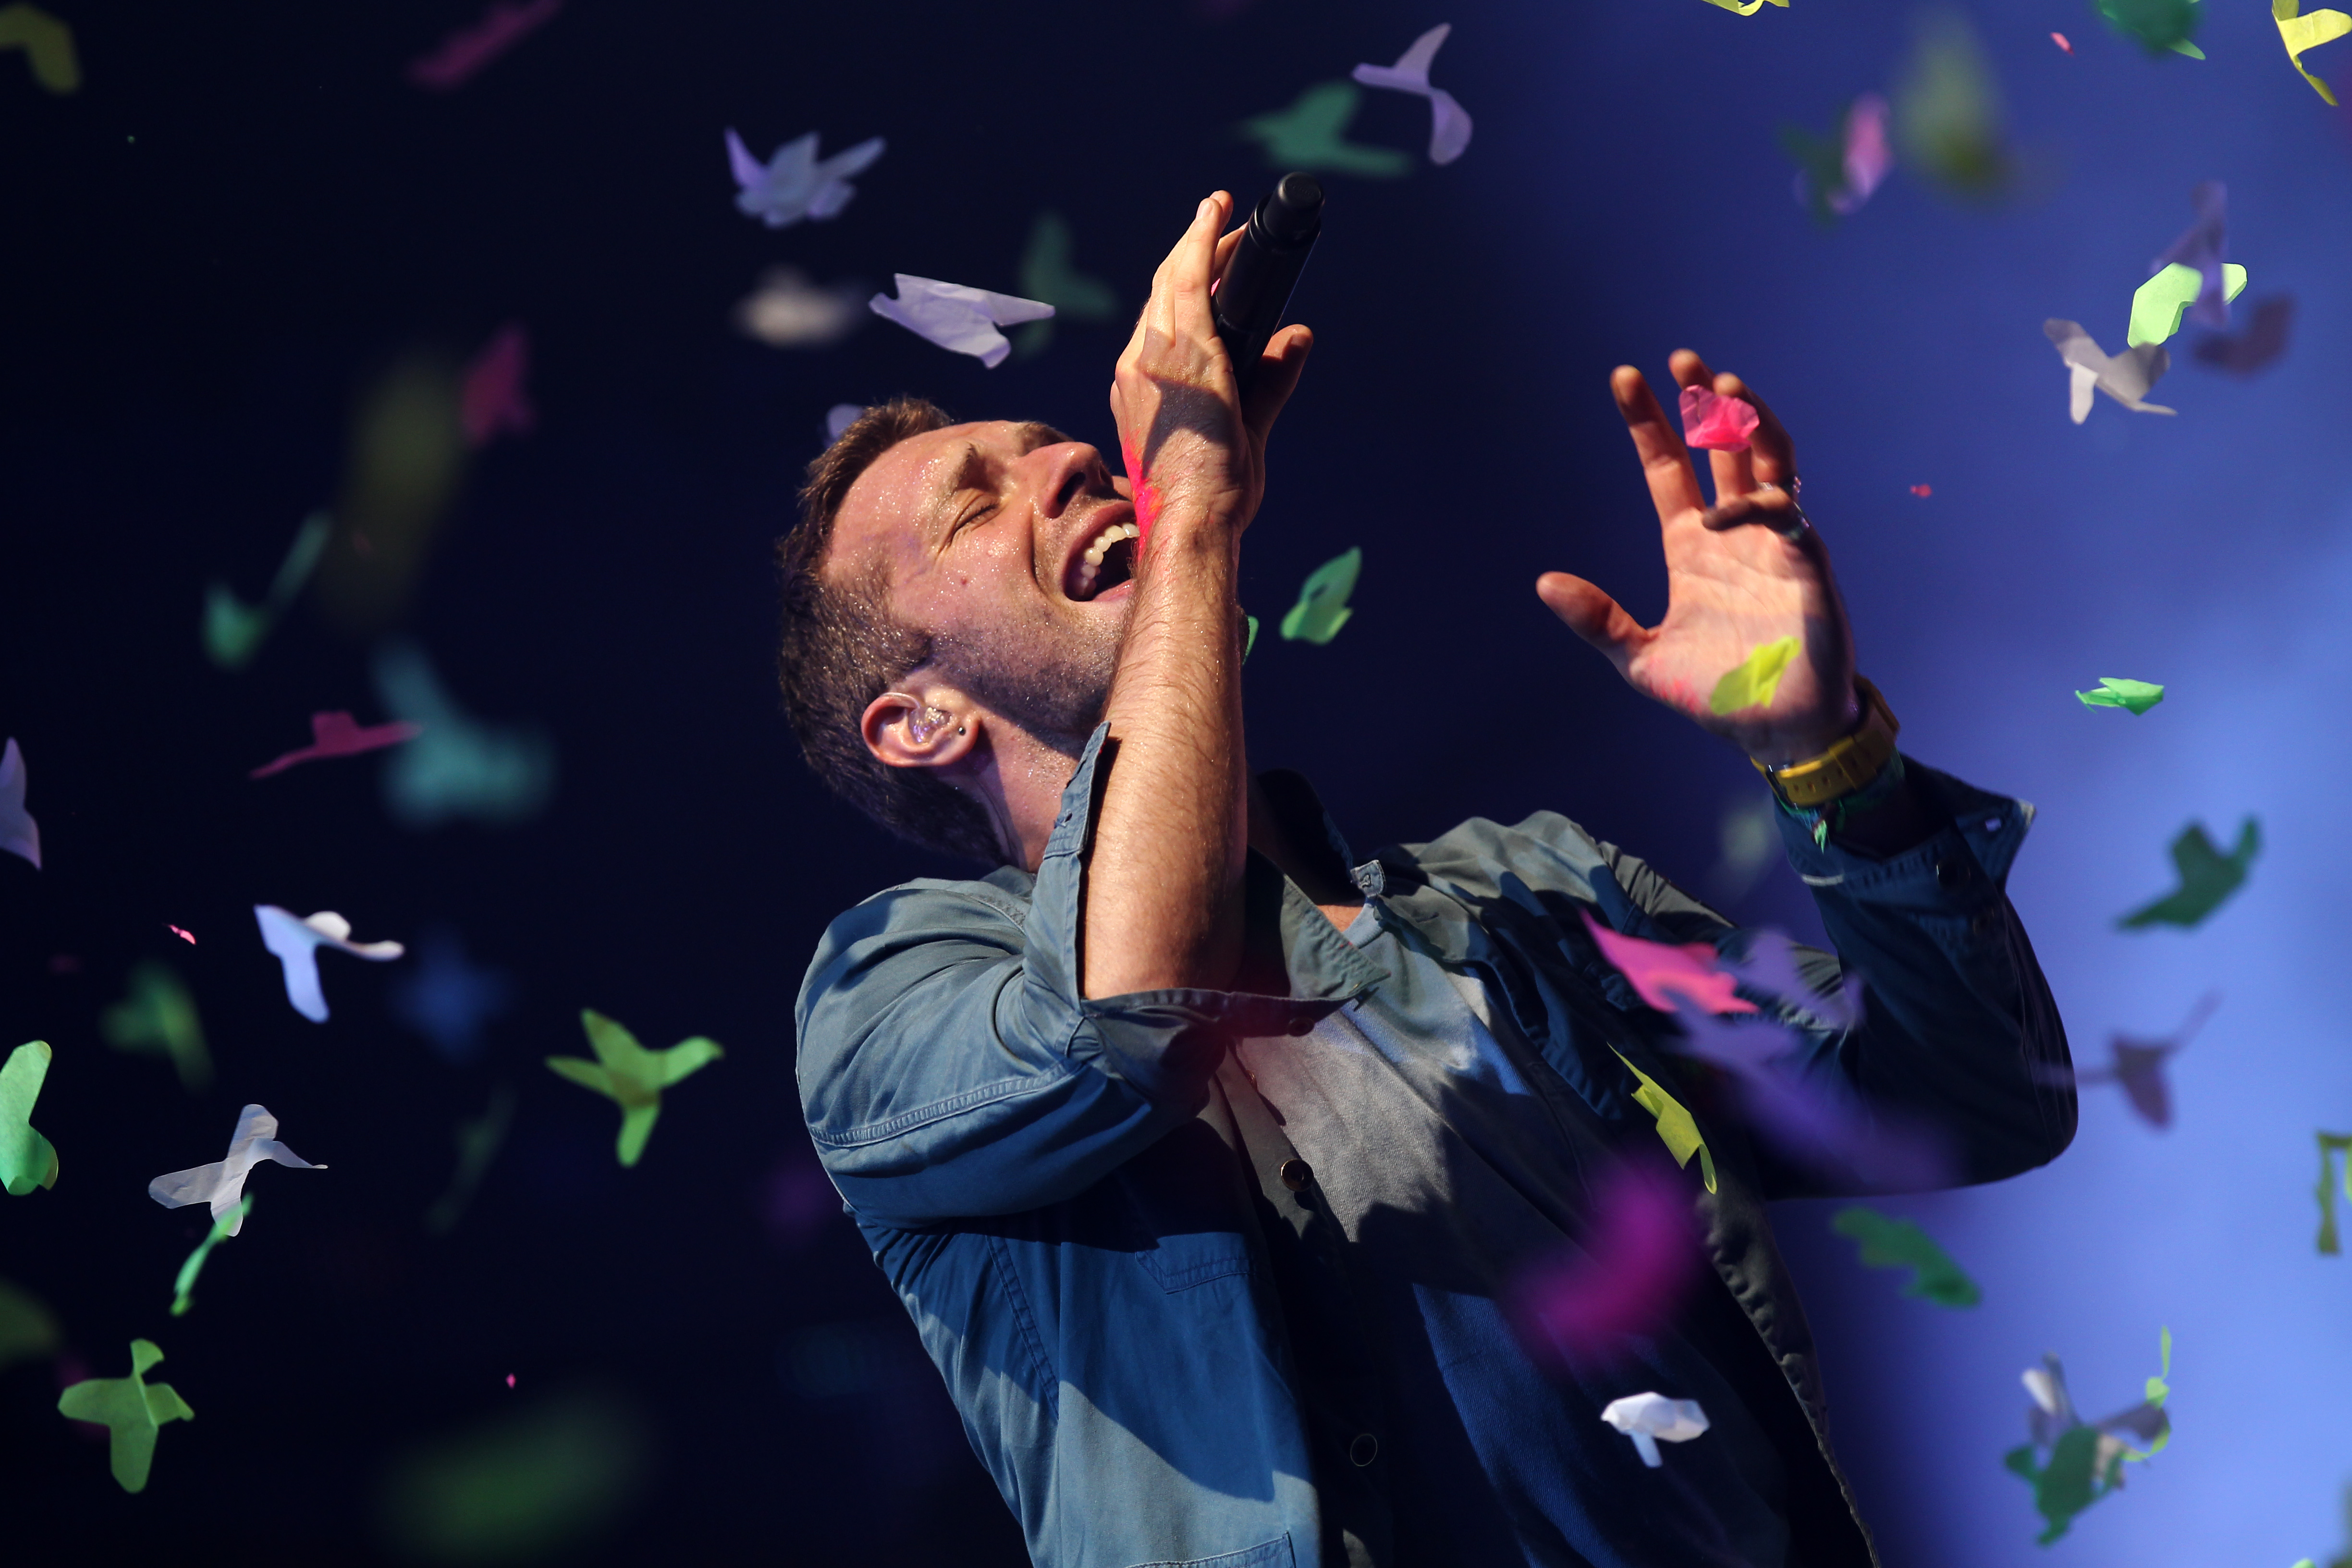 Coldplay – Hymn for the Weekend Lyrics